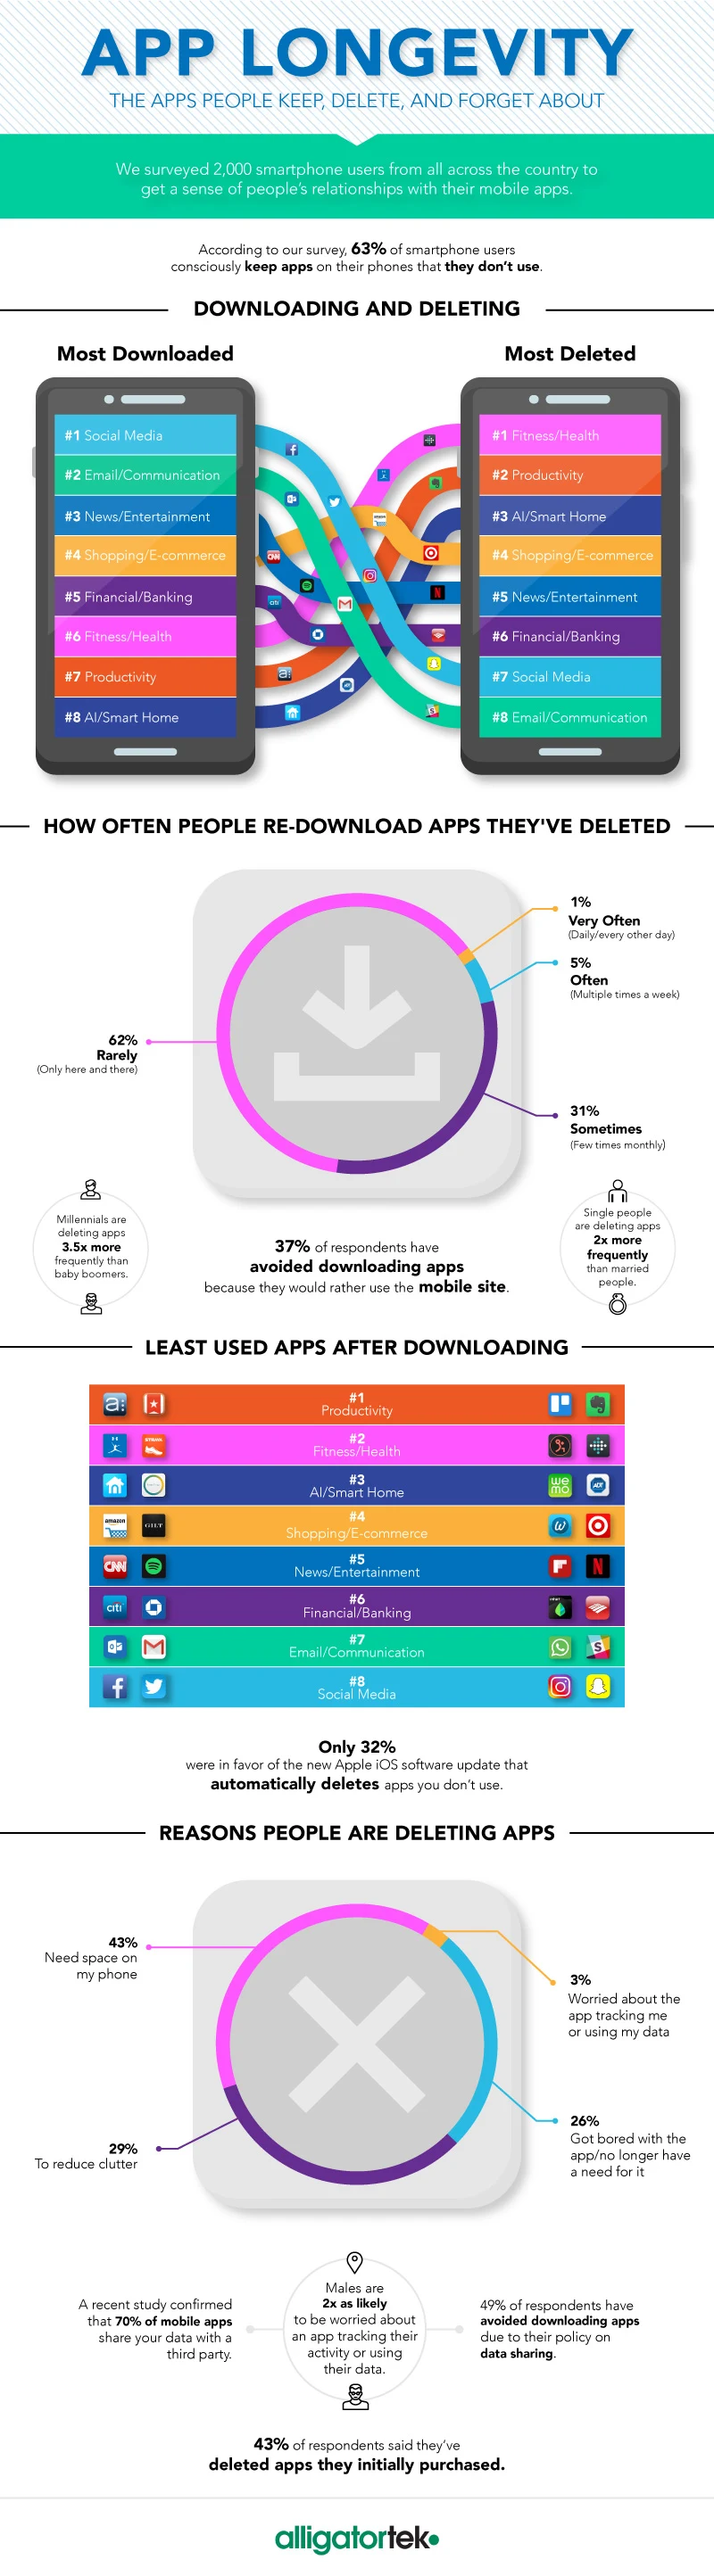 App Longevity: The Apps People Keep, Delete, and Forget About - infographic